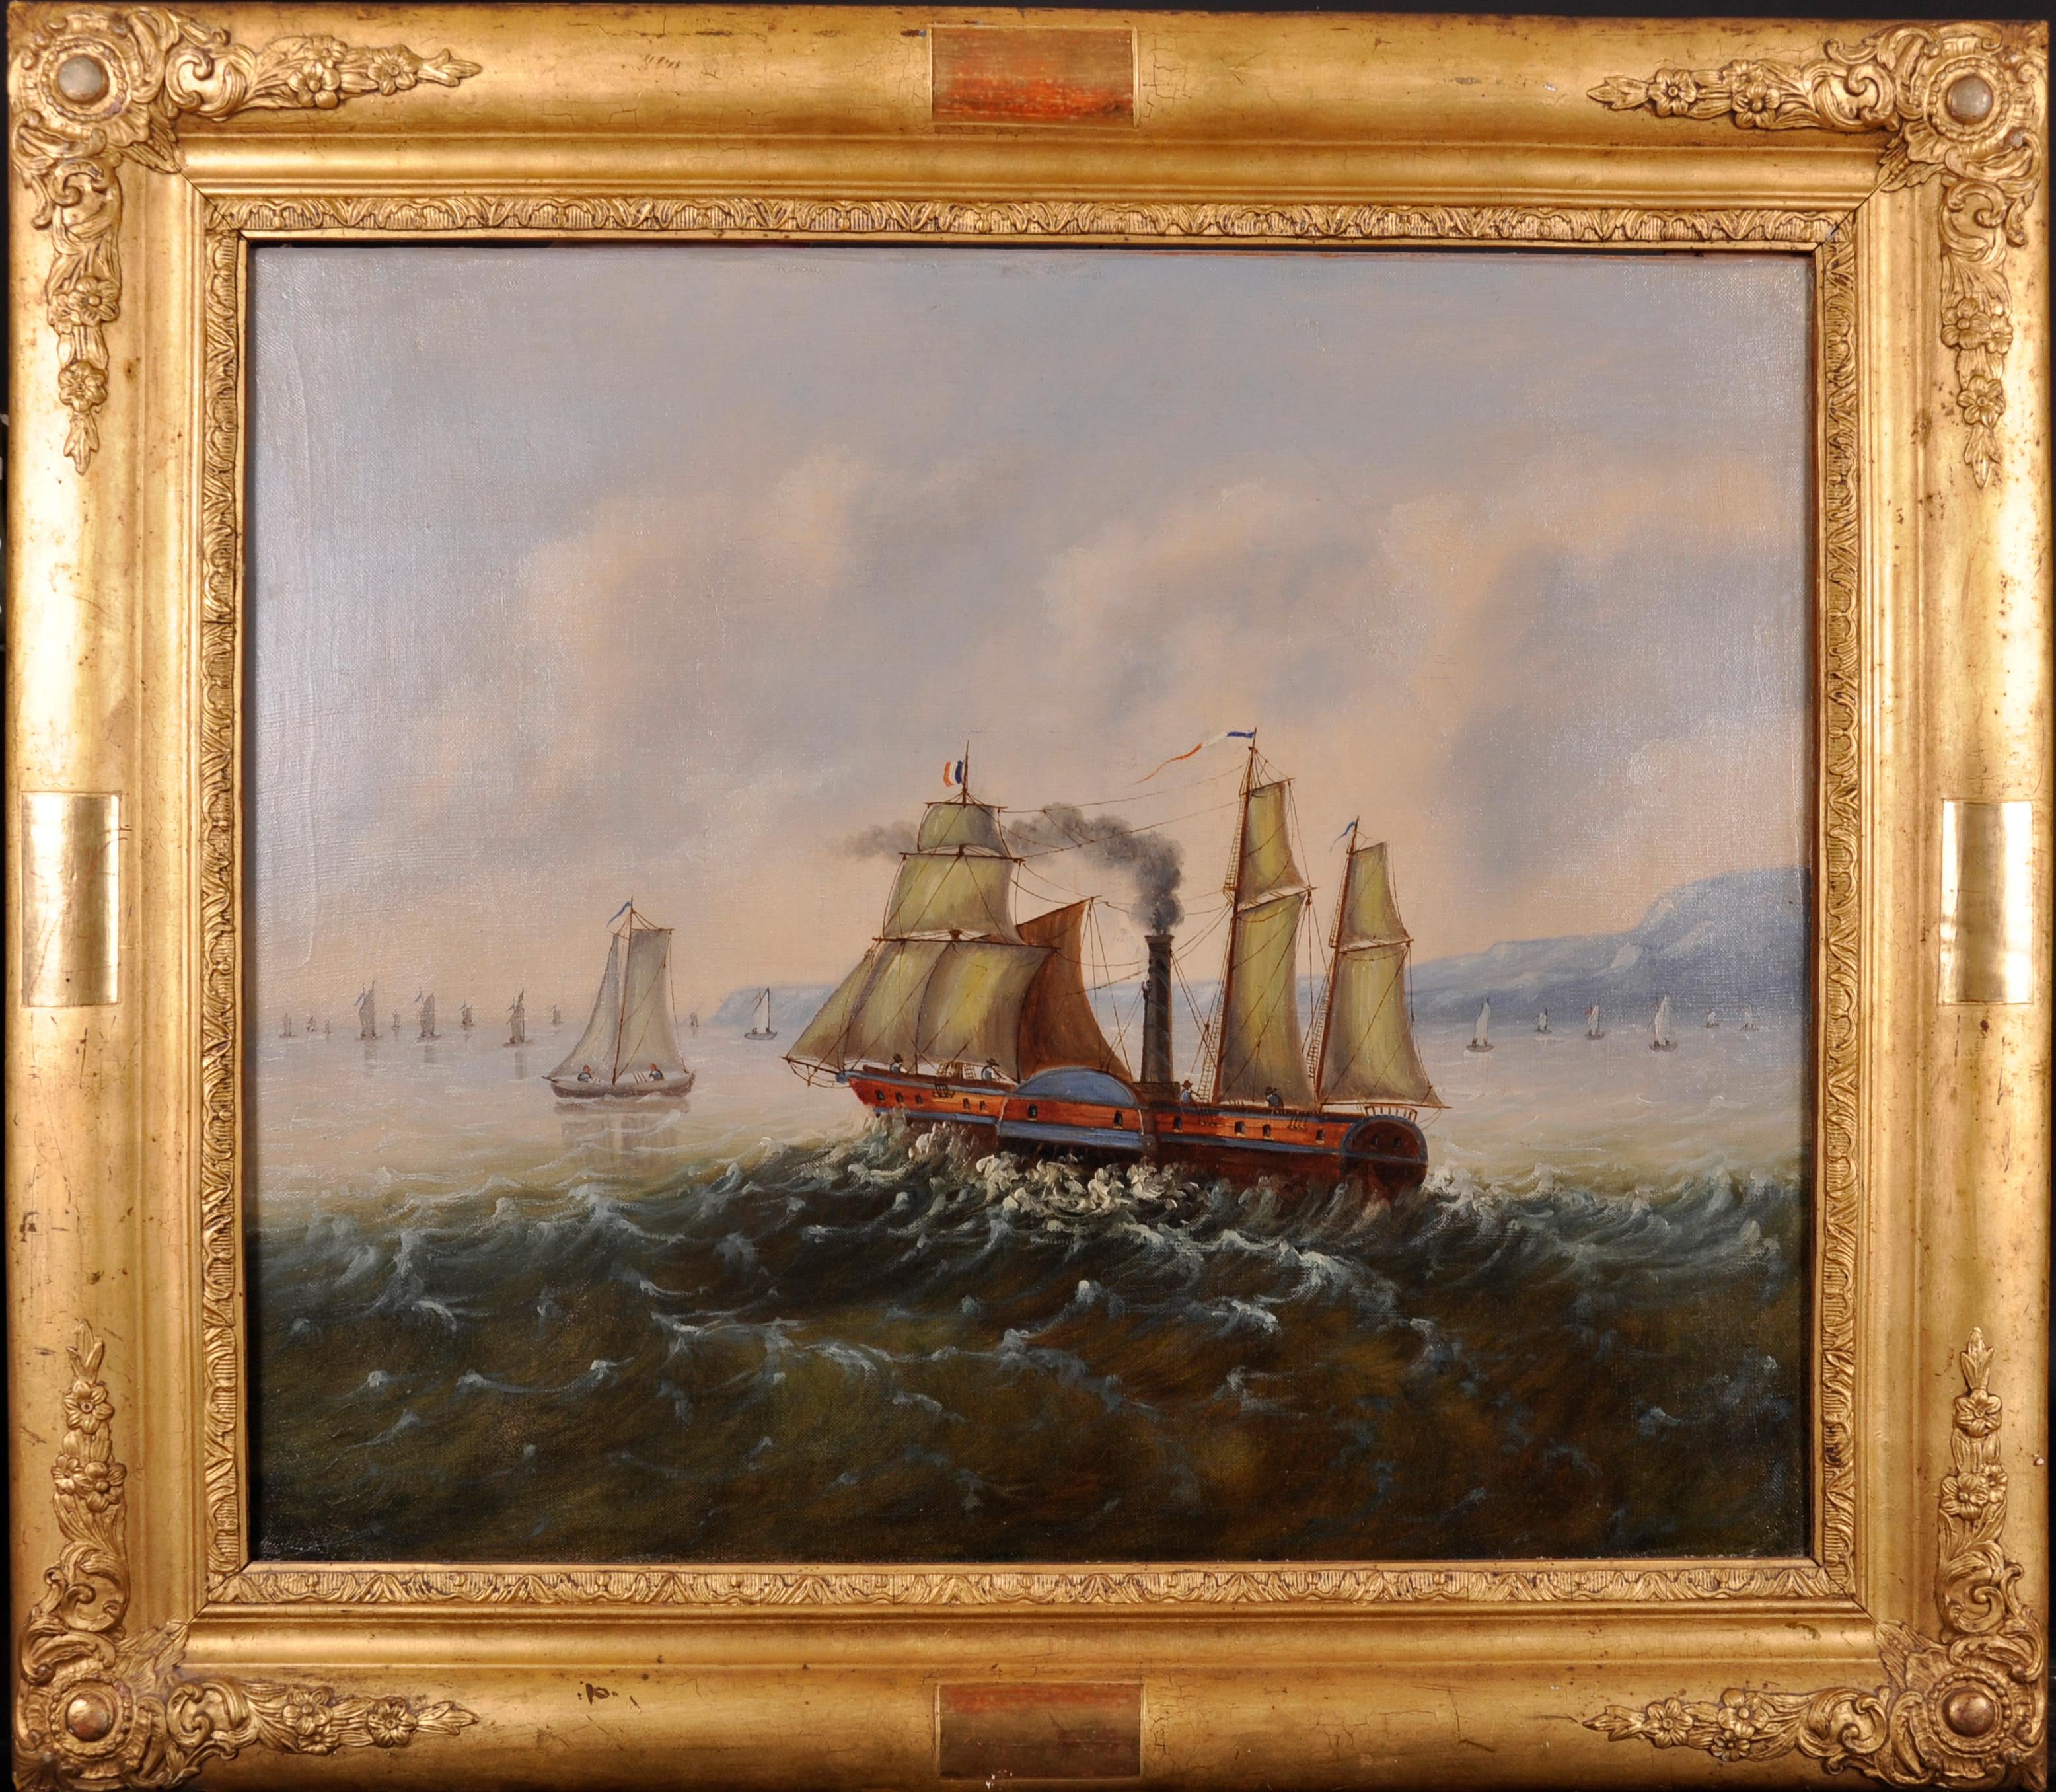 French Artist Landscape Painting - Fine 19th Century French Oil Painting - Paddle Steamer Ship Choppy Waters